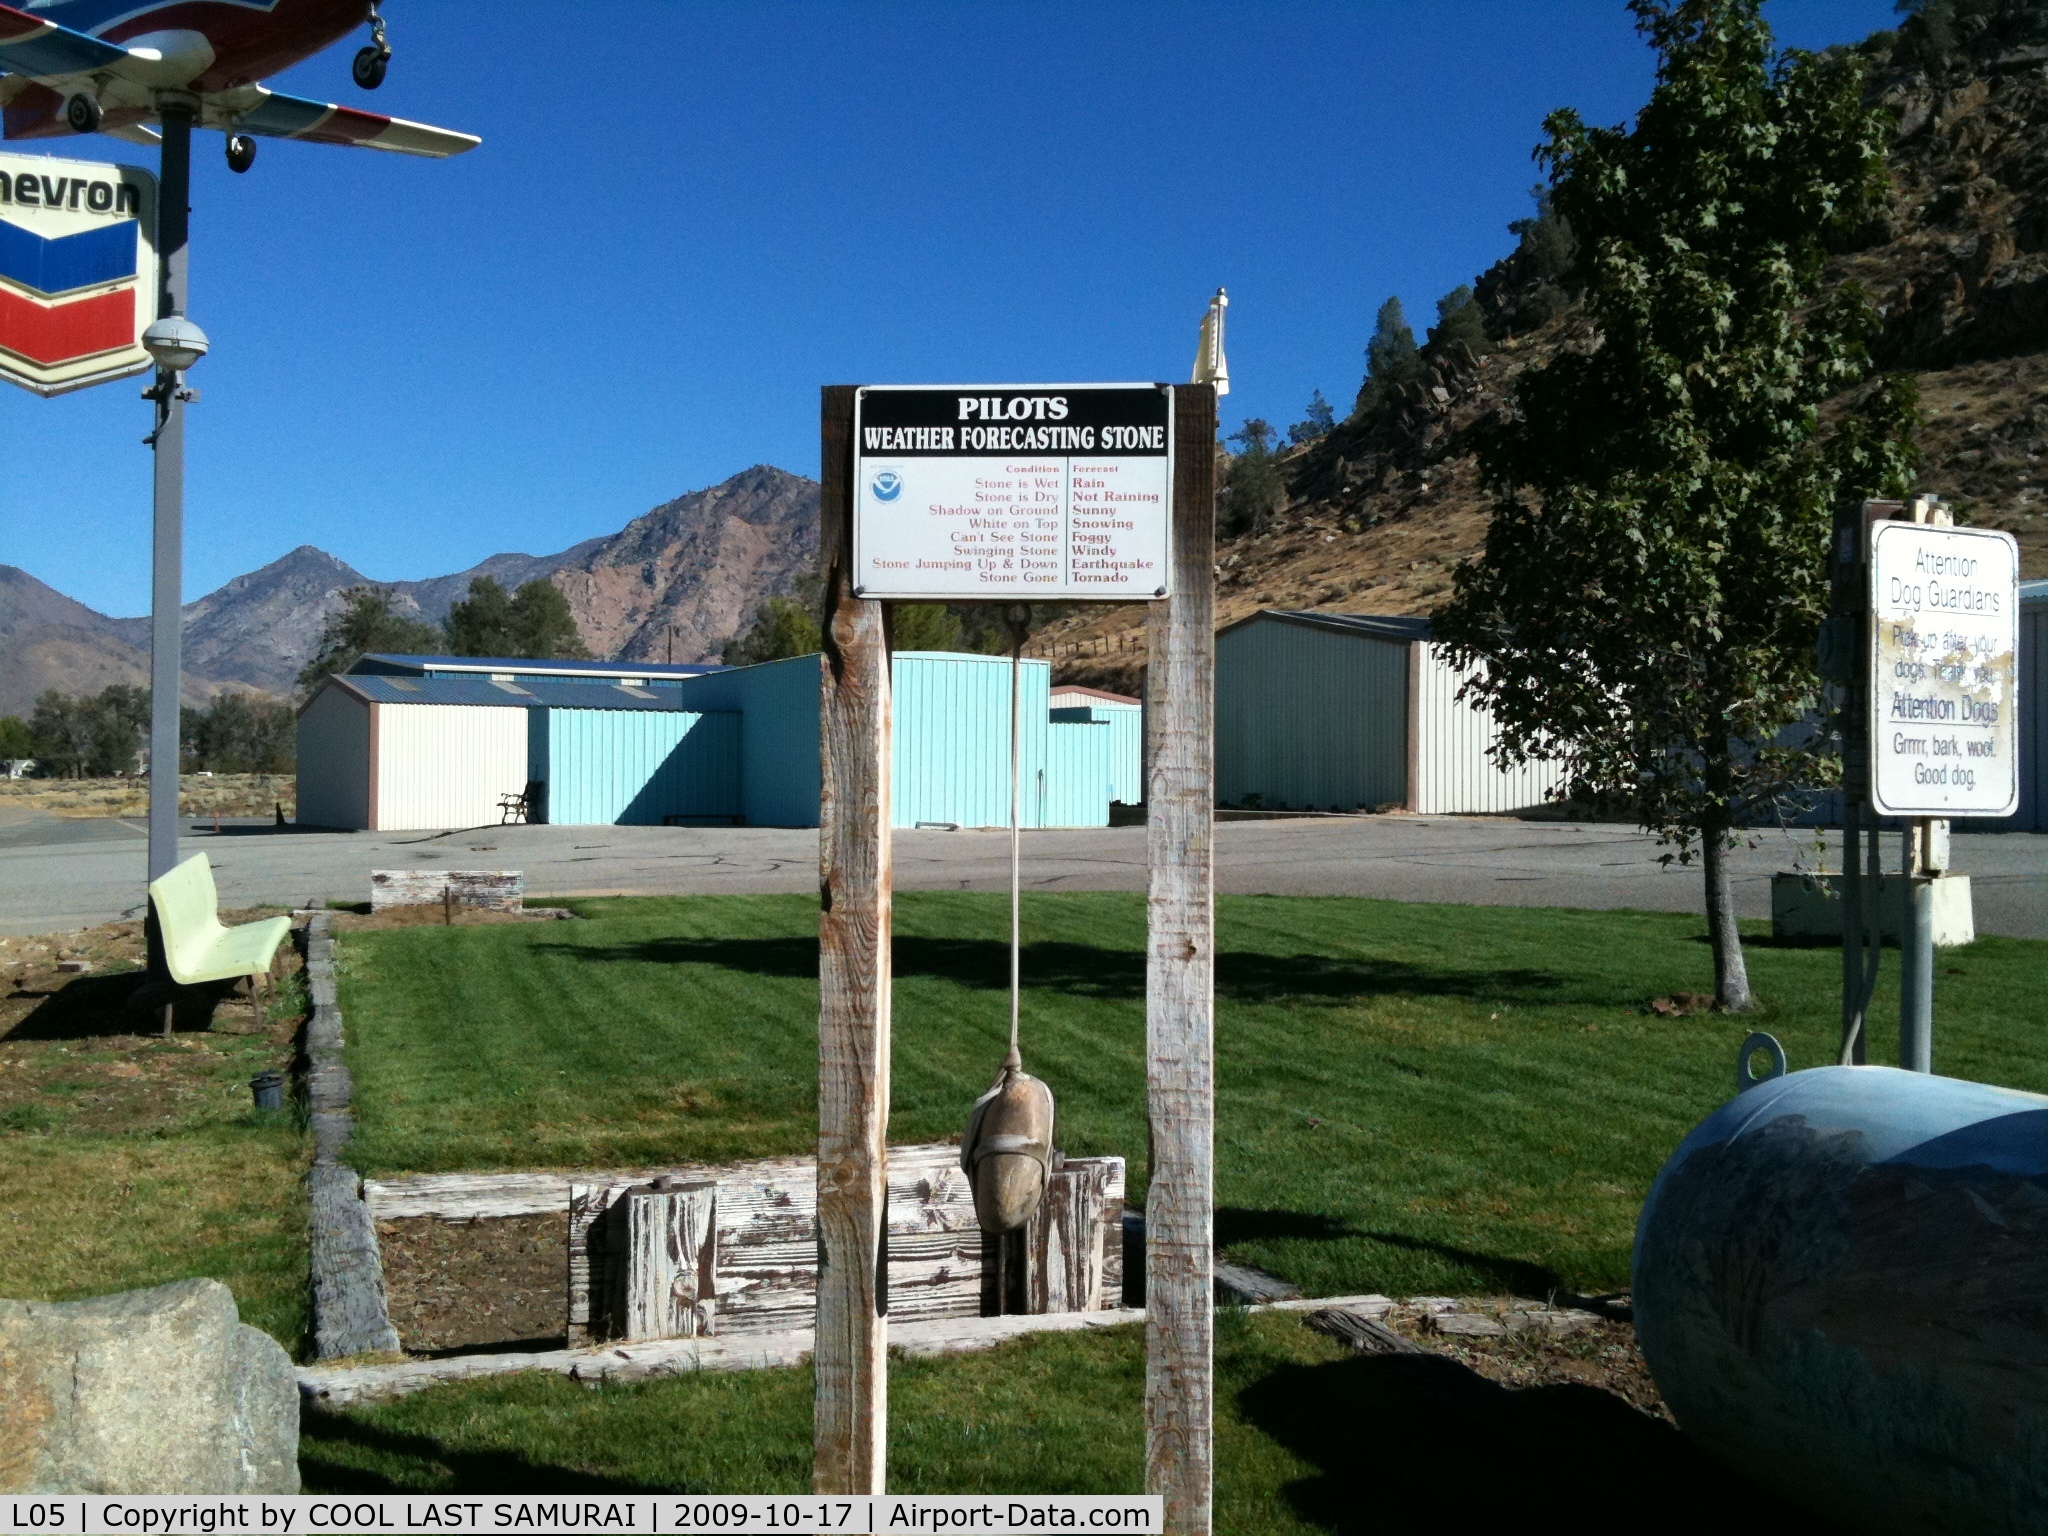 Kern Valley Airport (L05) - Weather forecasting stone in Kernville